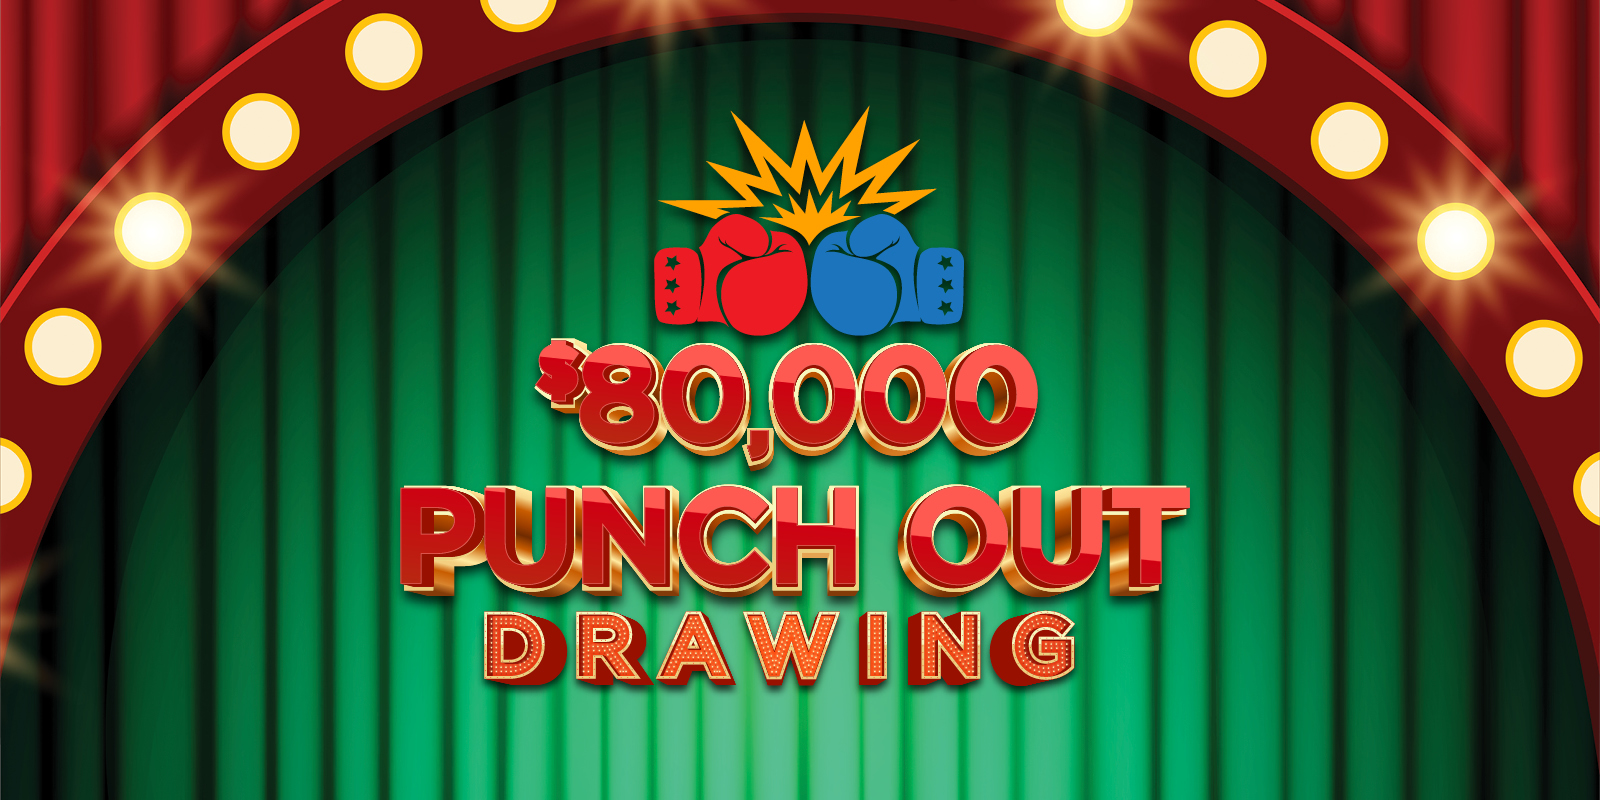 Punch Out Drawing creative showing boxing gloves hitting each other and a stage background